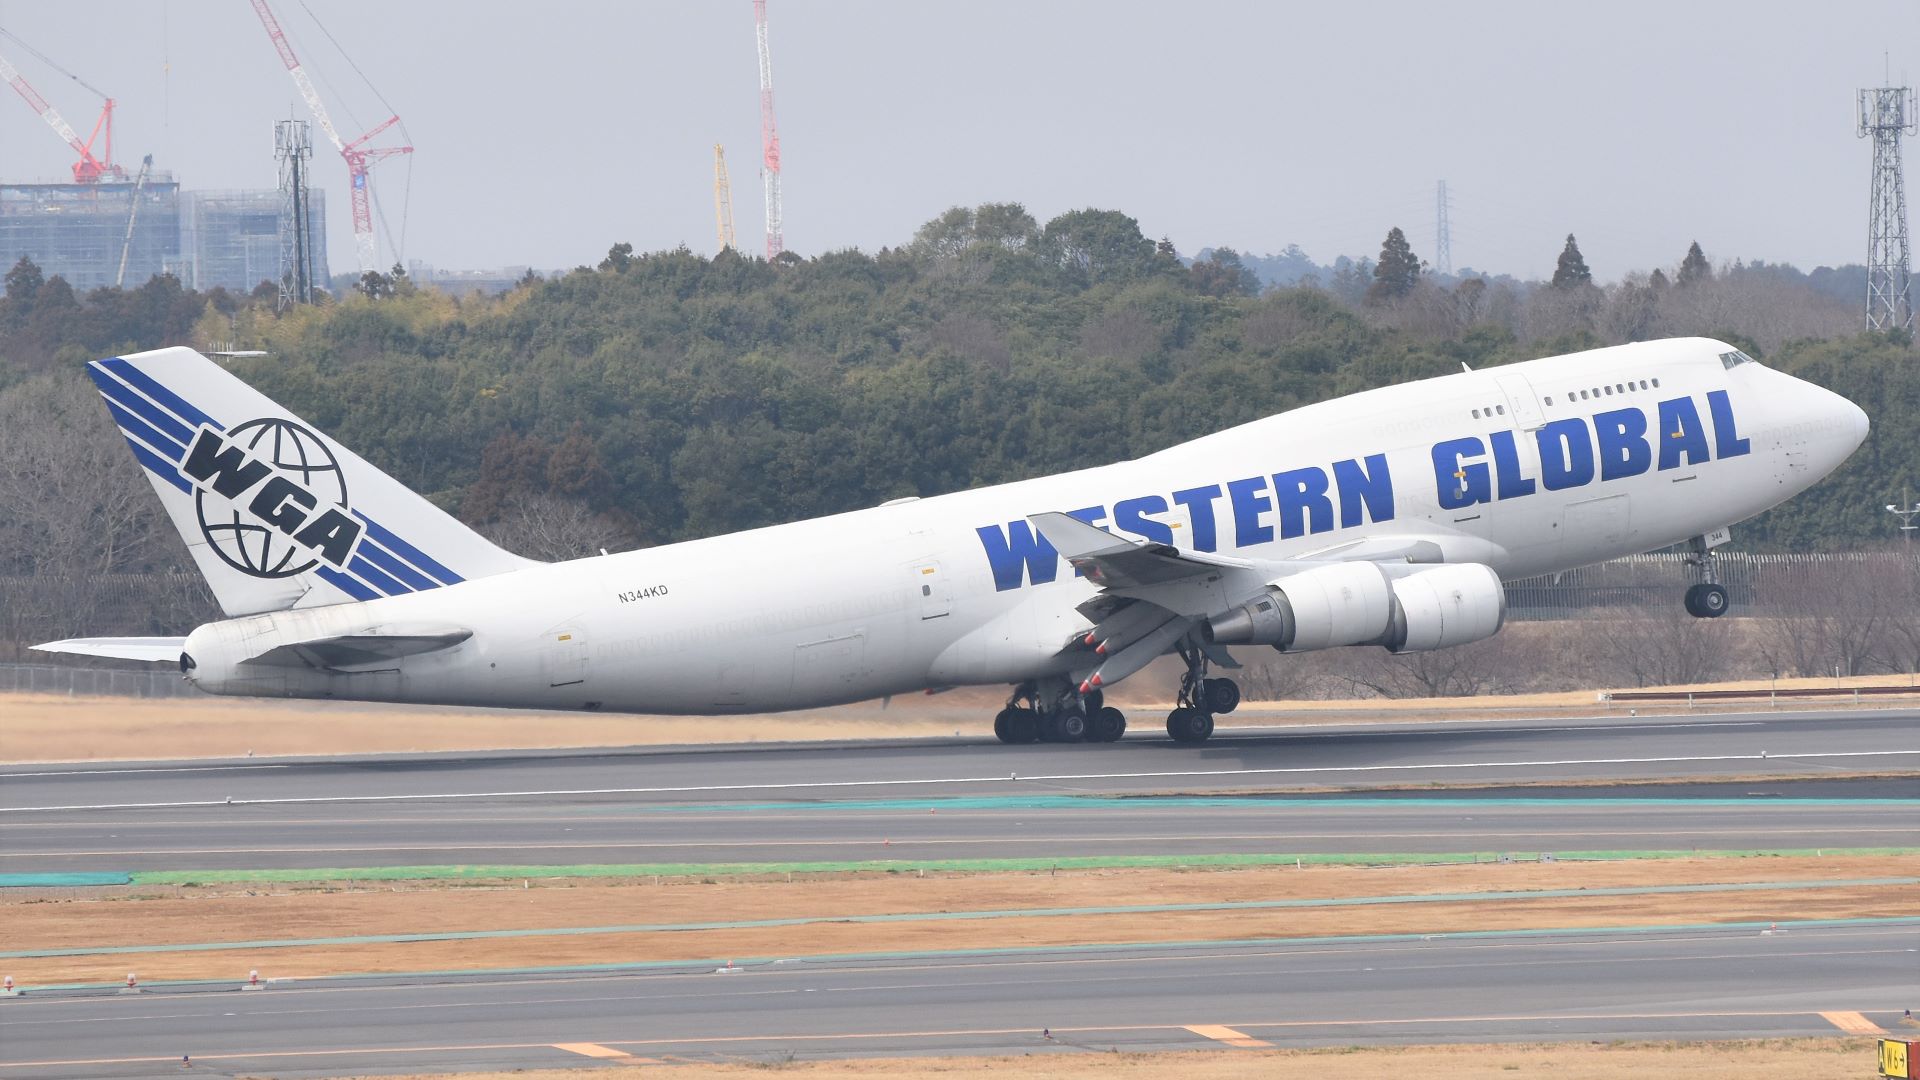 A white jumbo jet with blue lettering takes off with nose lifted in air.